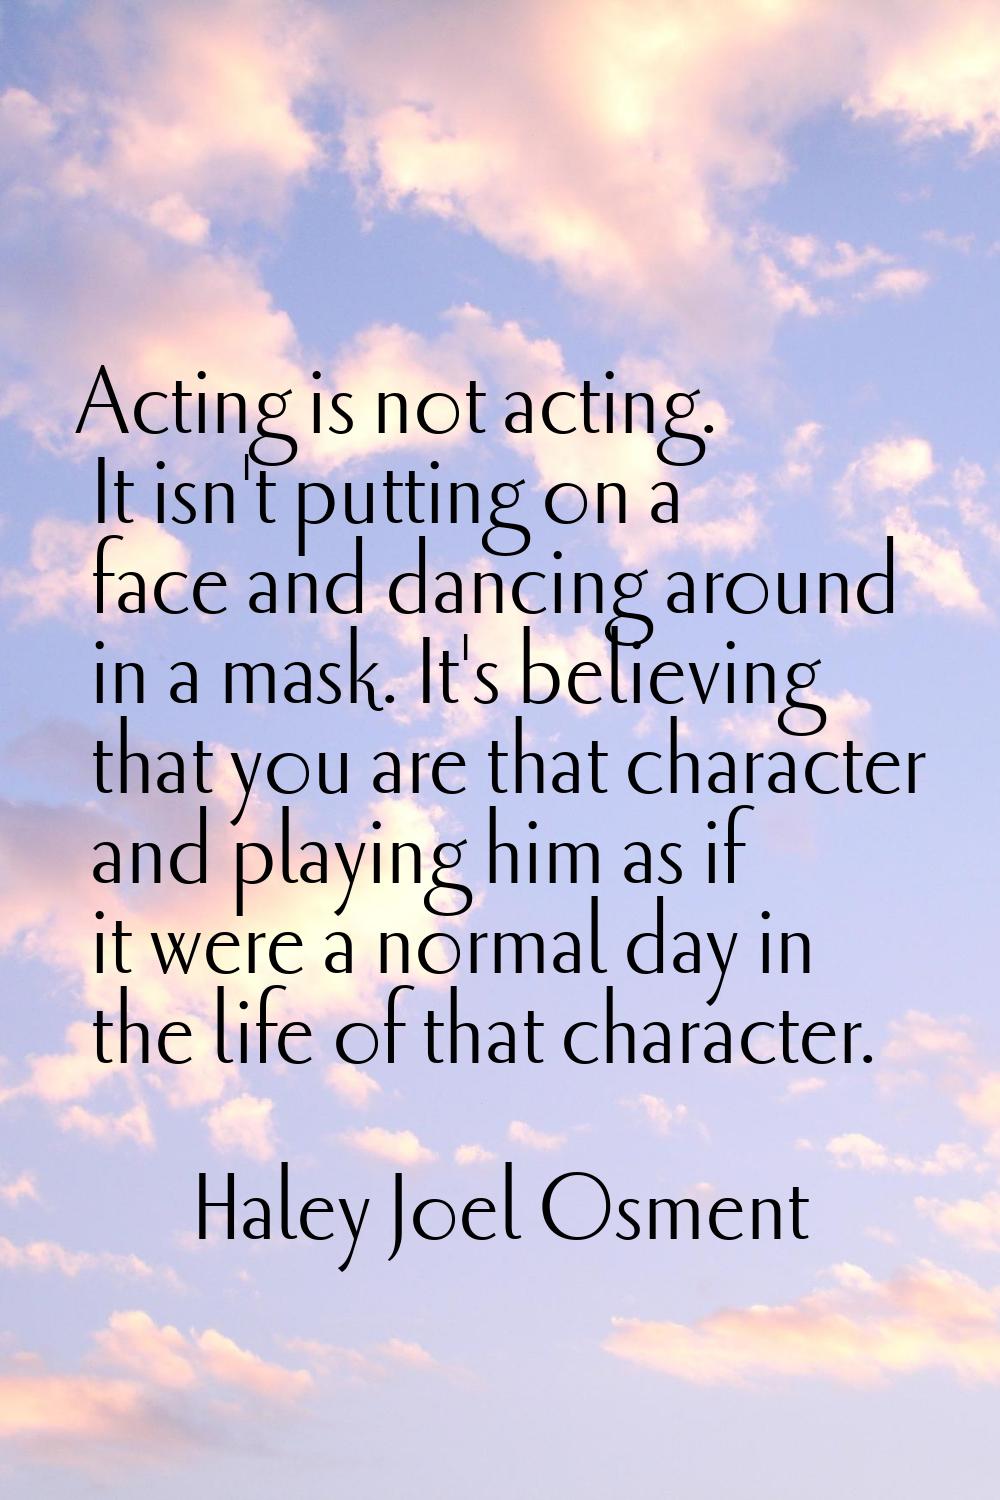 Acting is not acting. It isn't putting on a face and dancing around in a mask. It's believing that 